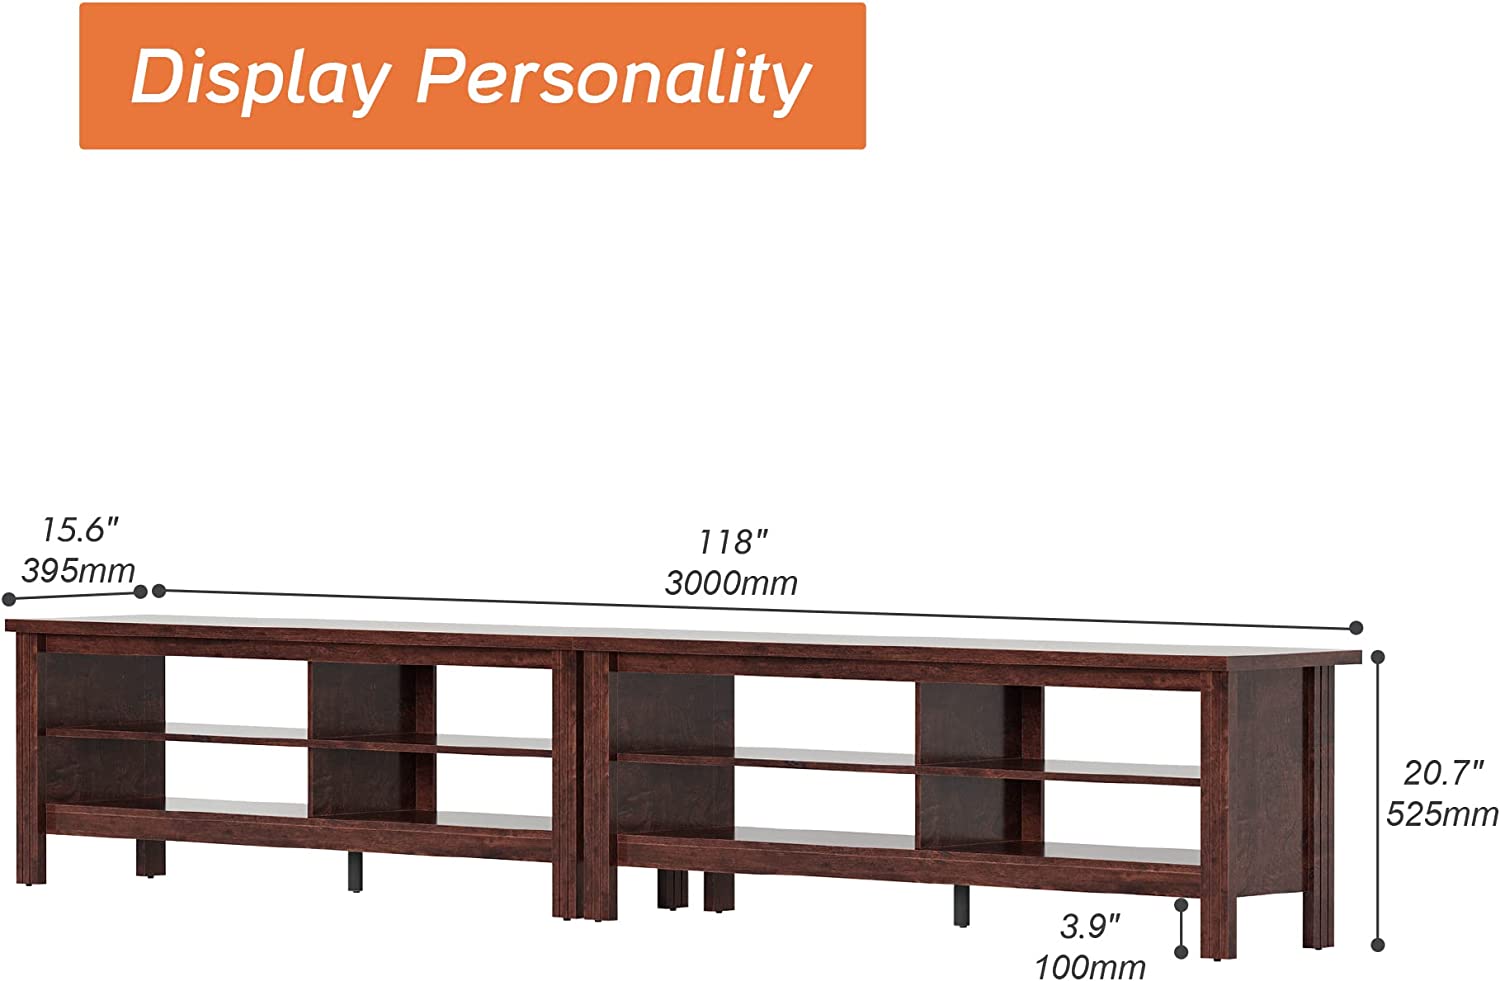 WAMPAT 118" TV Stand for 80 85 90 100 Inch TV, Entertainment Center for Living Room Bedroom, Brown